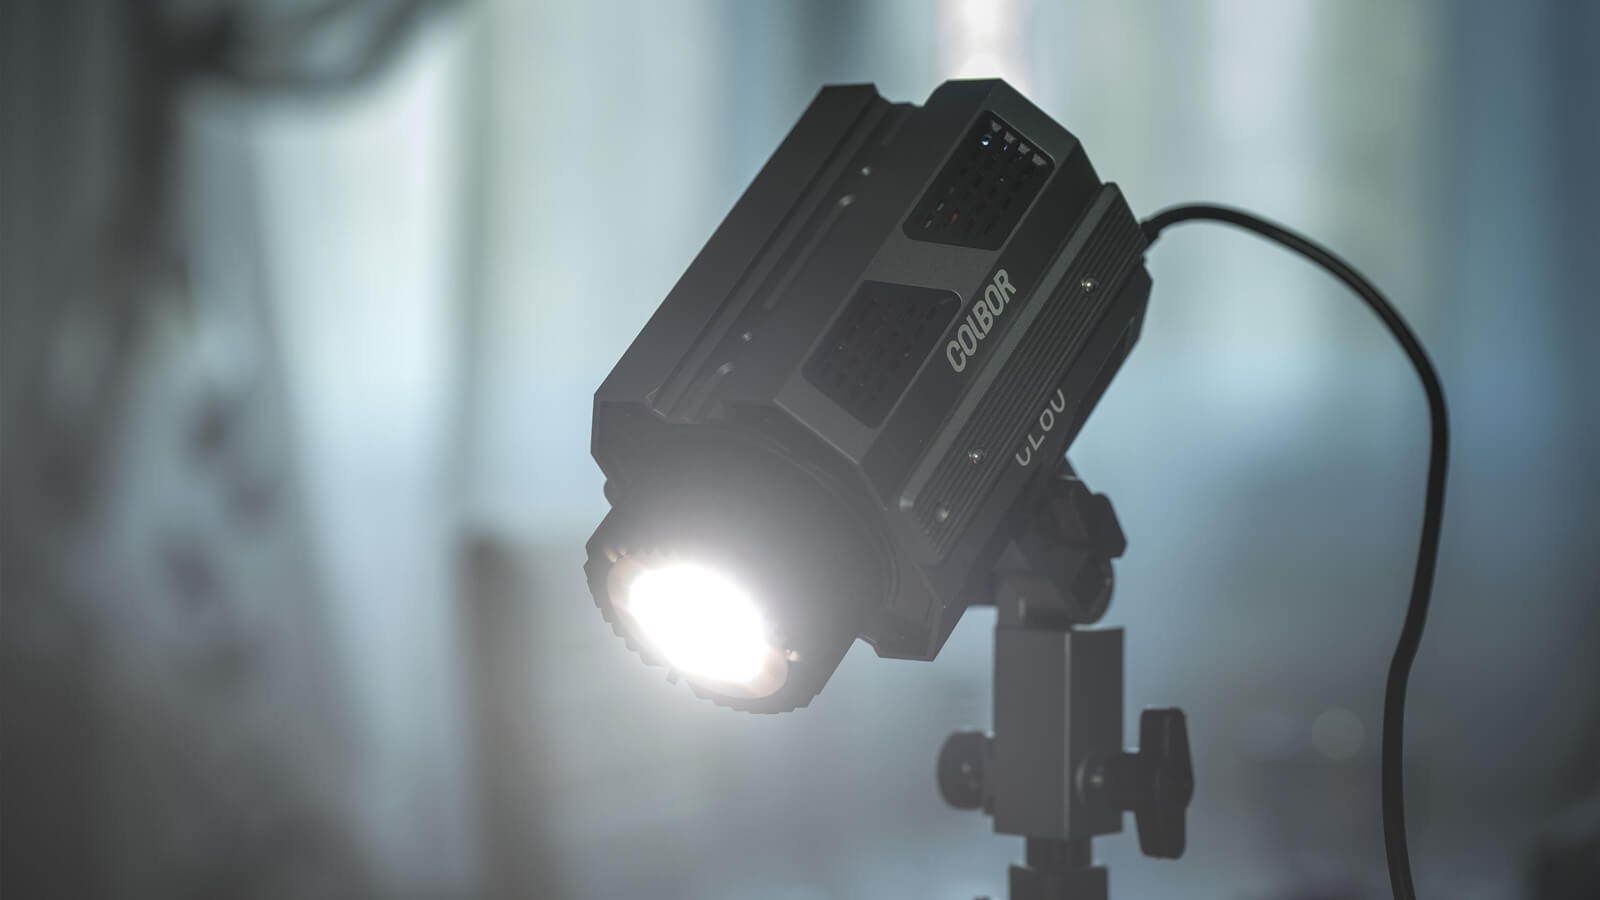 COLBOR CL60 best studio light for video can create cool lighting for podcasting.